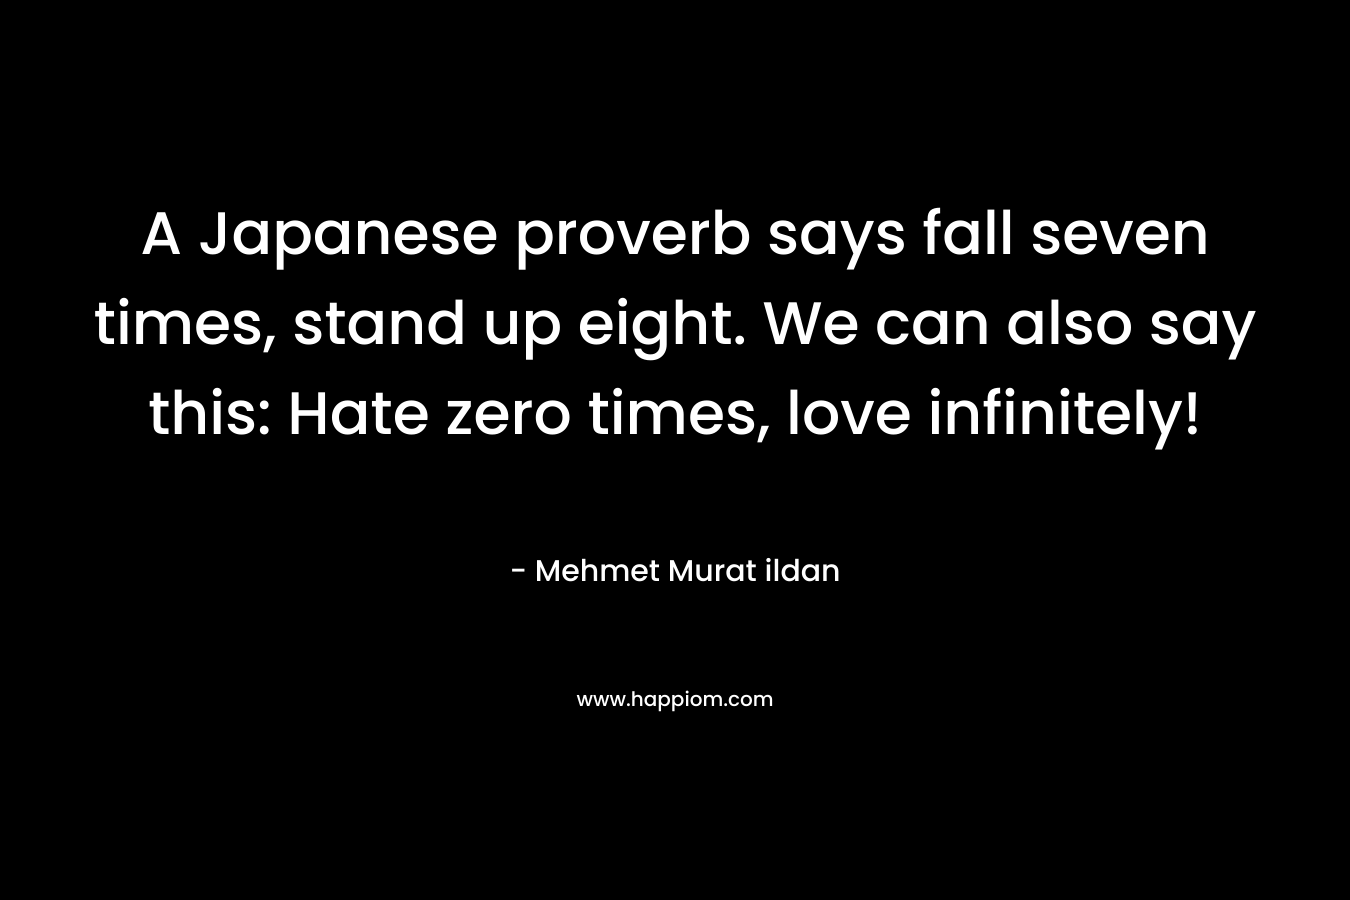 A Japanese proverb says fall seven times, stand up eight. We can also say this: Hate zero times, love infinitely! – Mehmet Murat ildan